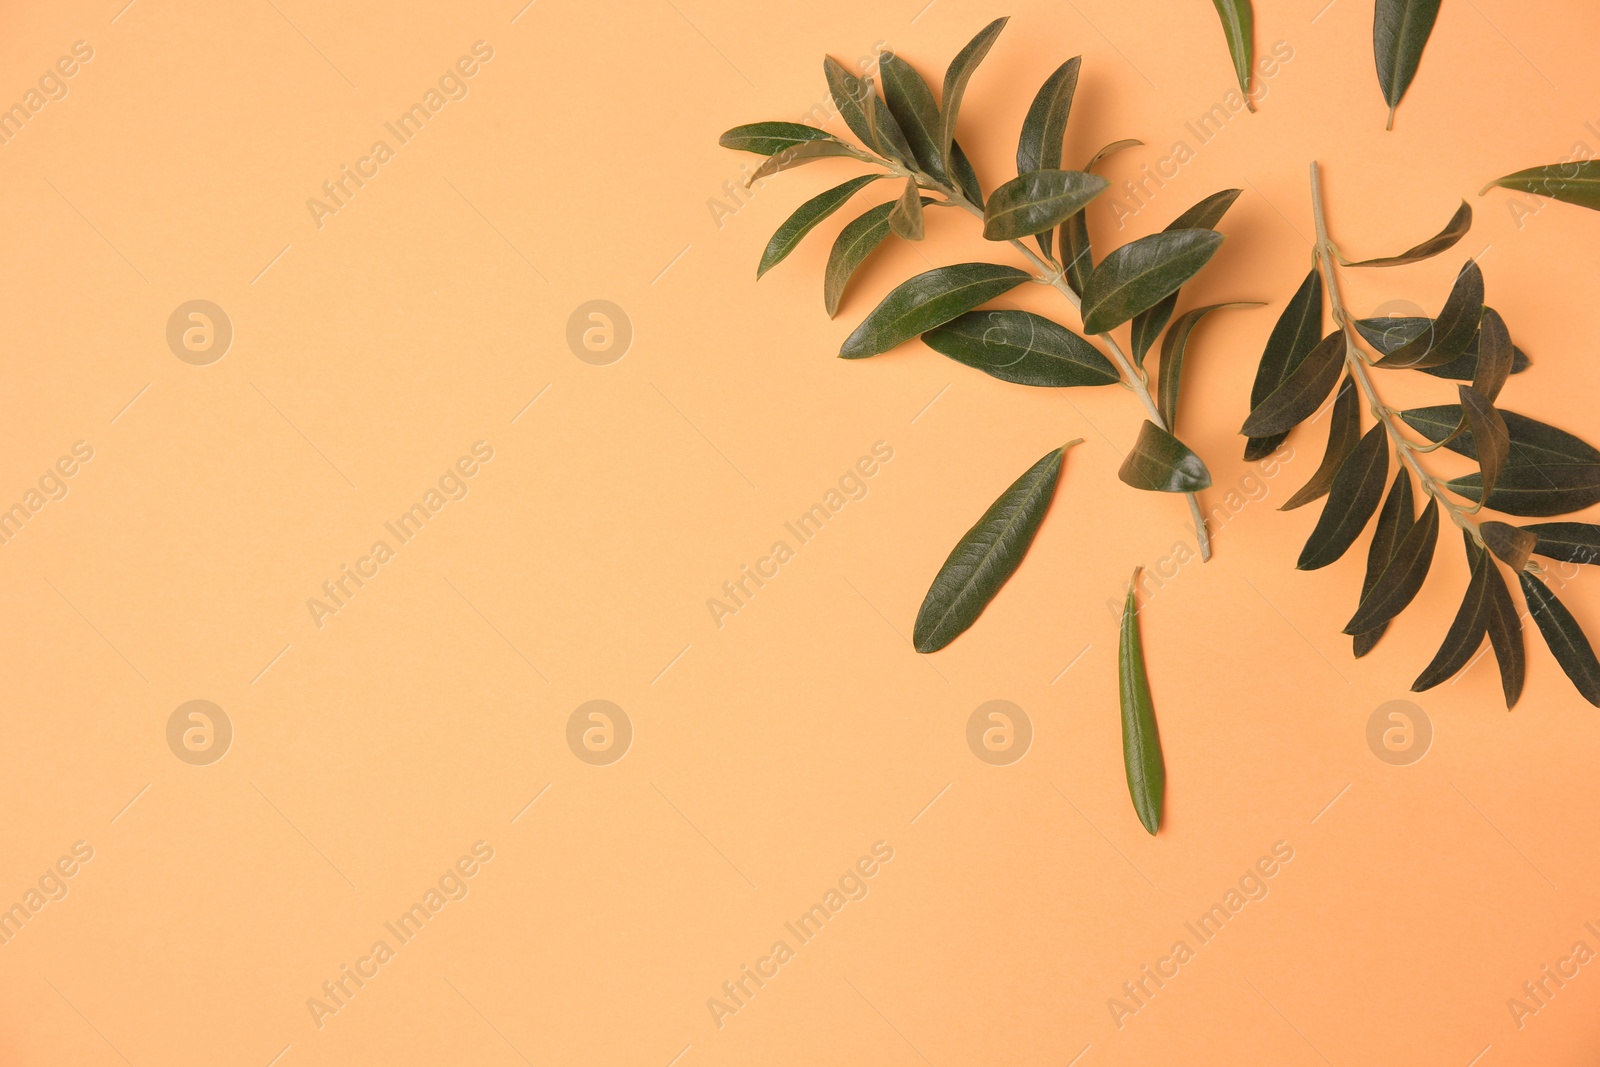 Photo of Olive twigs with fresh green leaves on pale orange background, flat lay. Space for text